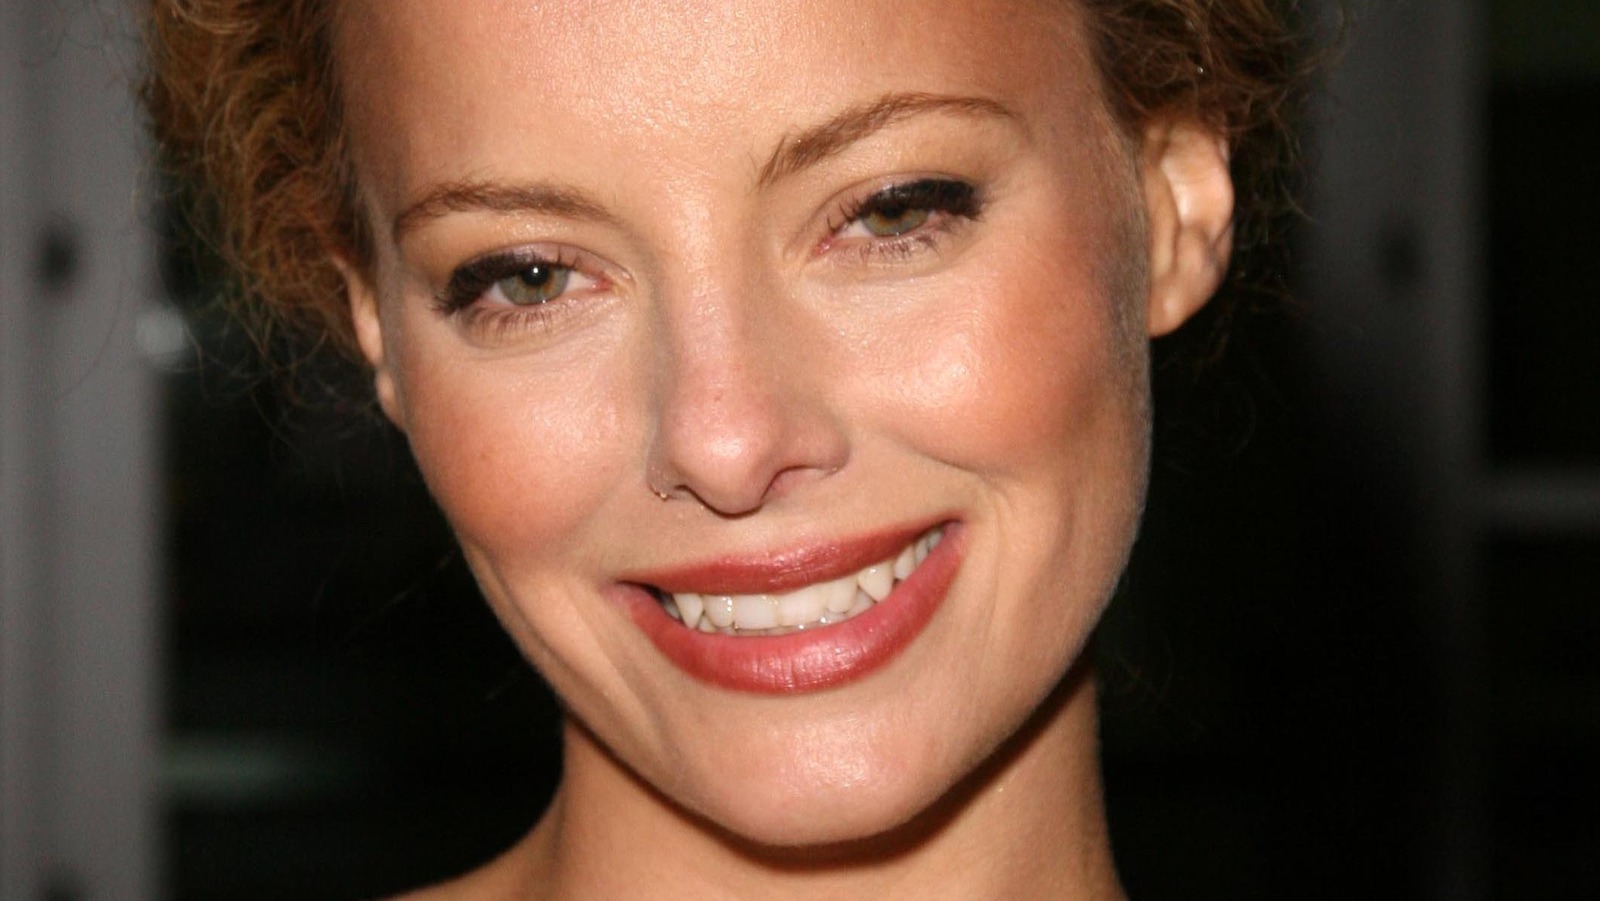 the serious kidney condition bijou phillips suffered with for years